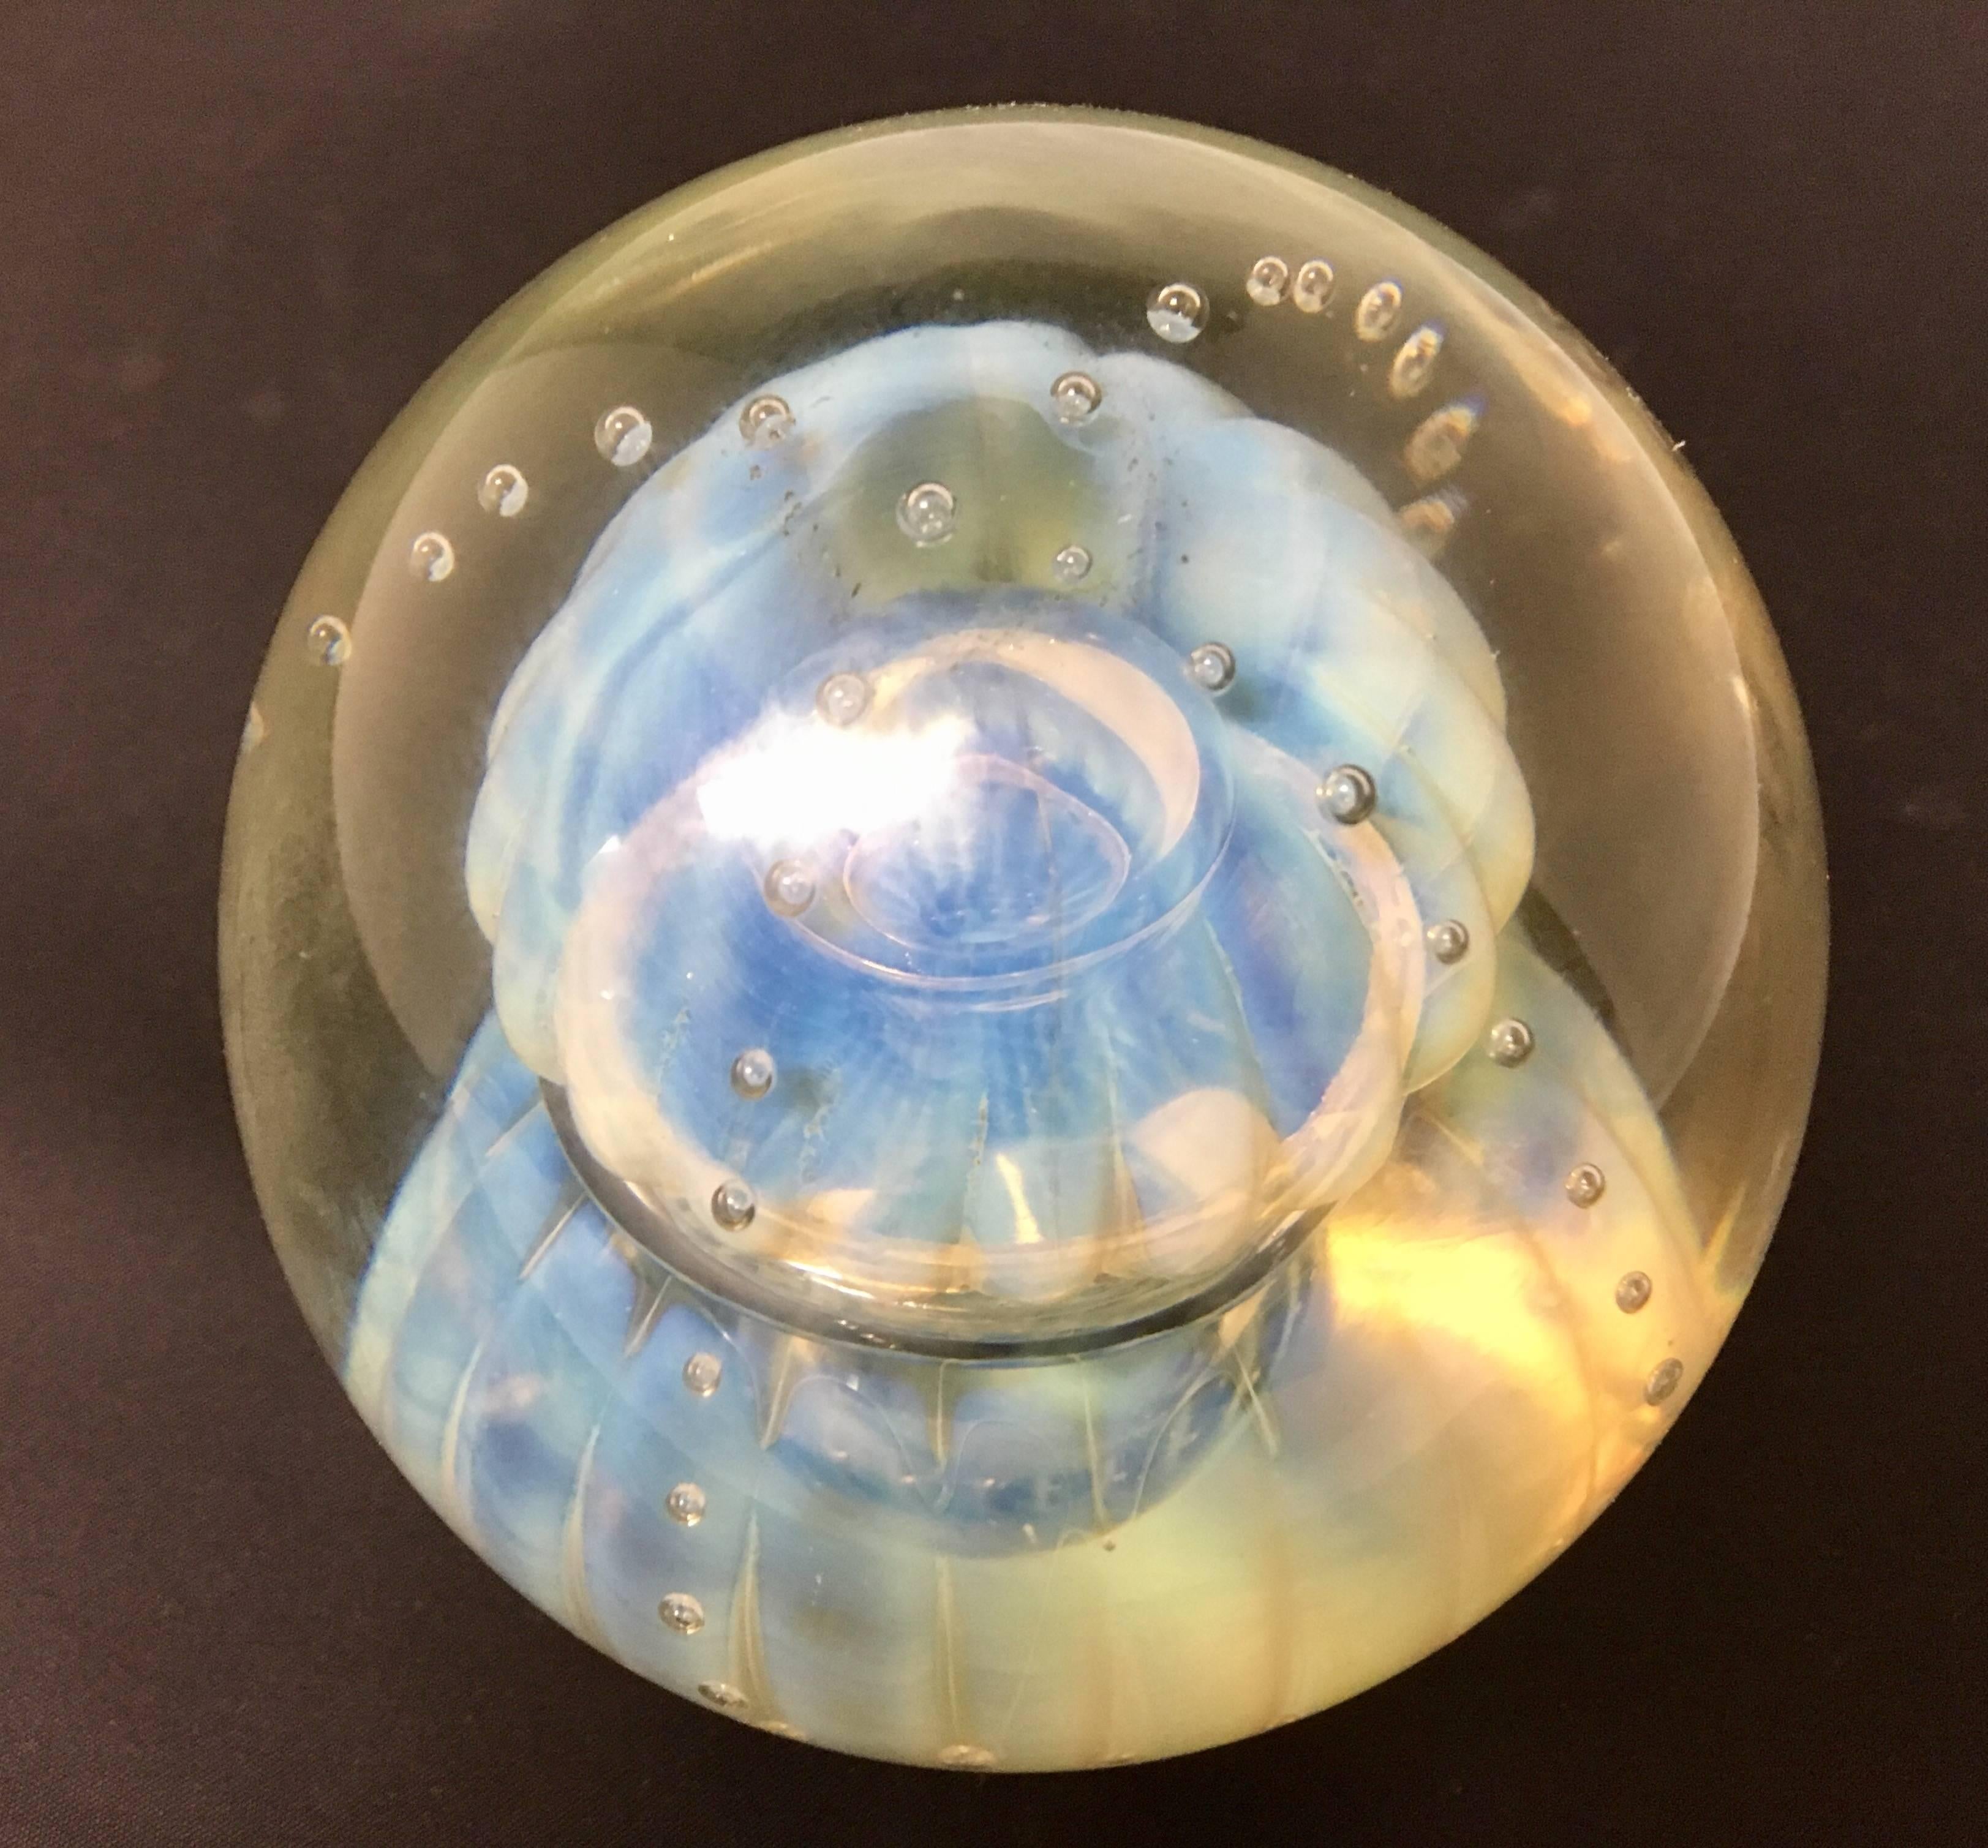 Post-Modern Gorgeous Blown Glass Jellyfish Paperweight by Edols Signed and Dated